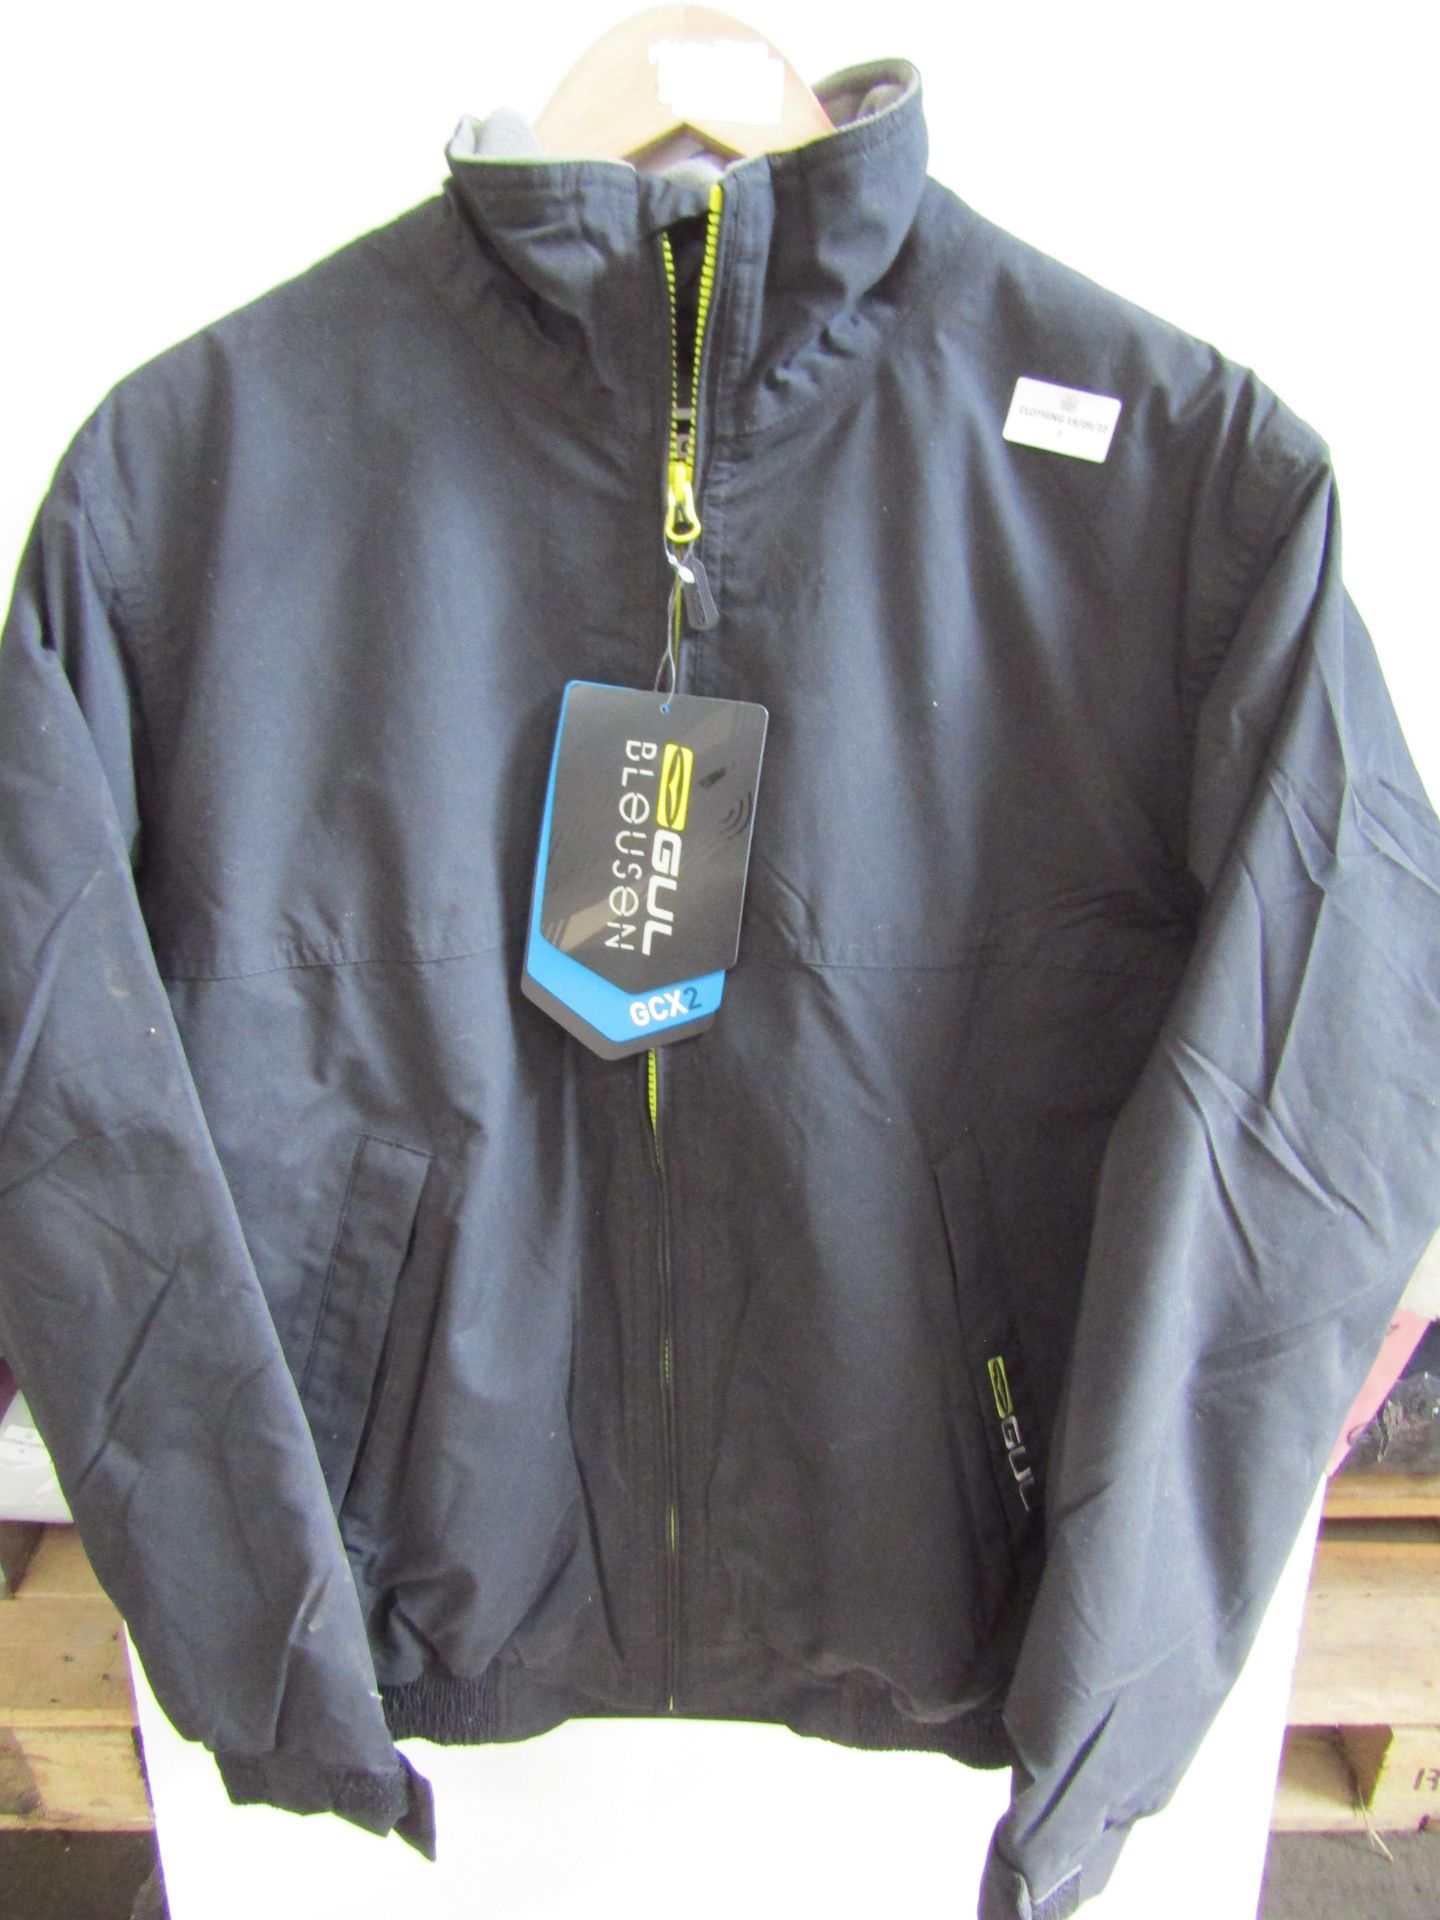 Gul Beacon Blousen Jacket Black Size S Waterproof Windproof Breathable New With Tags RRP £60